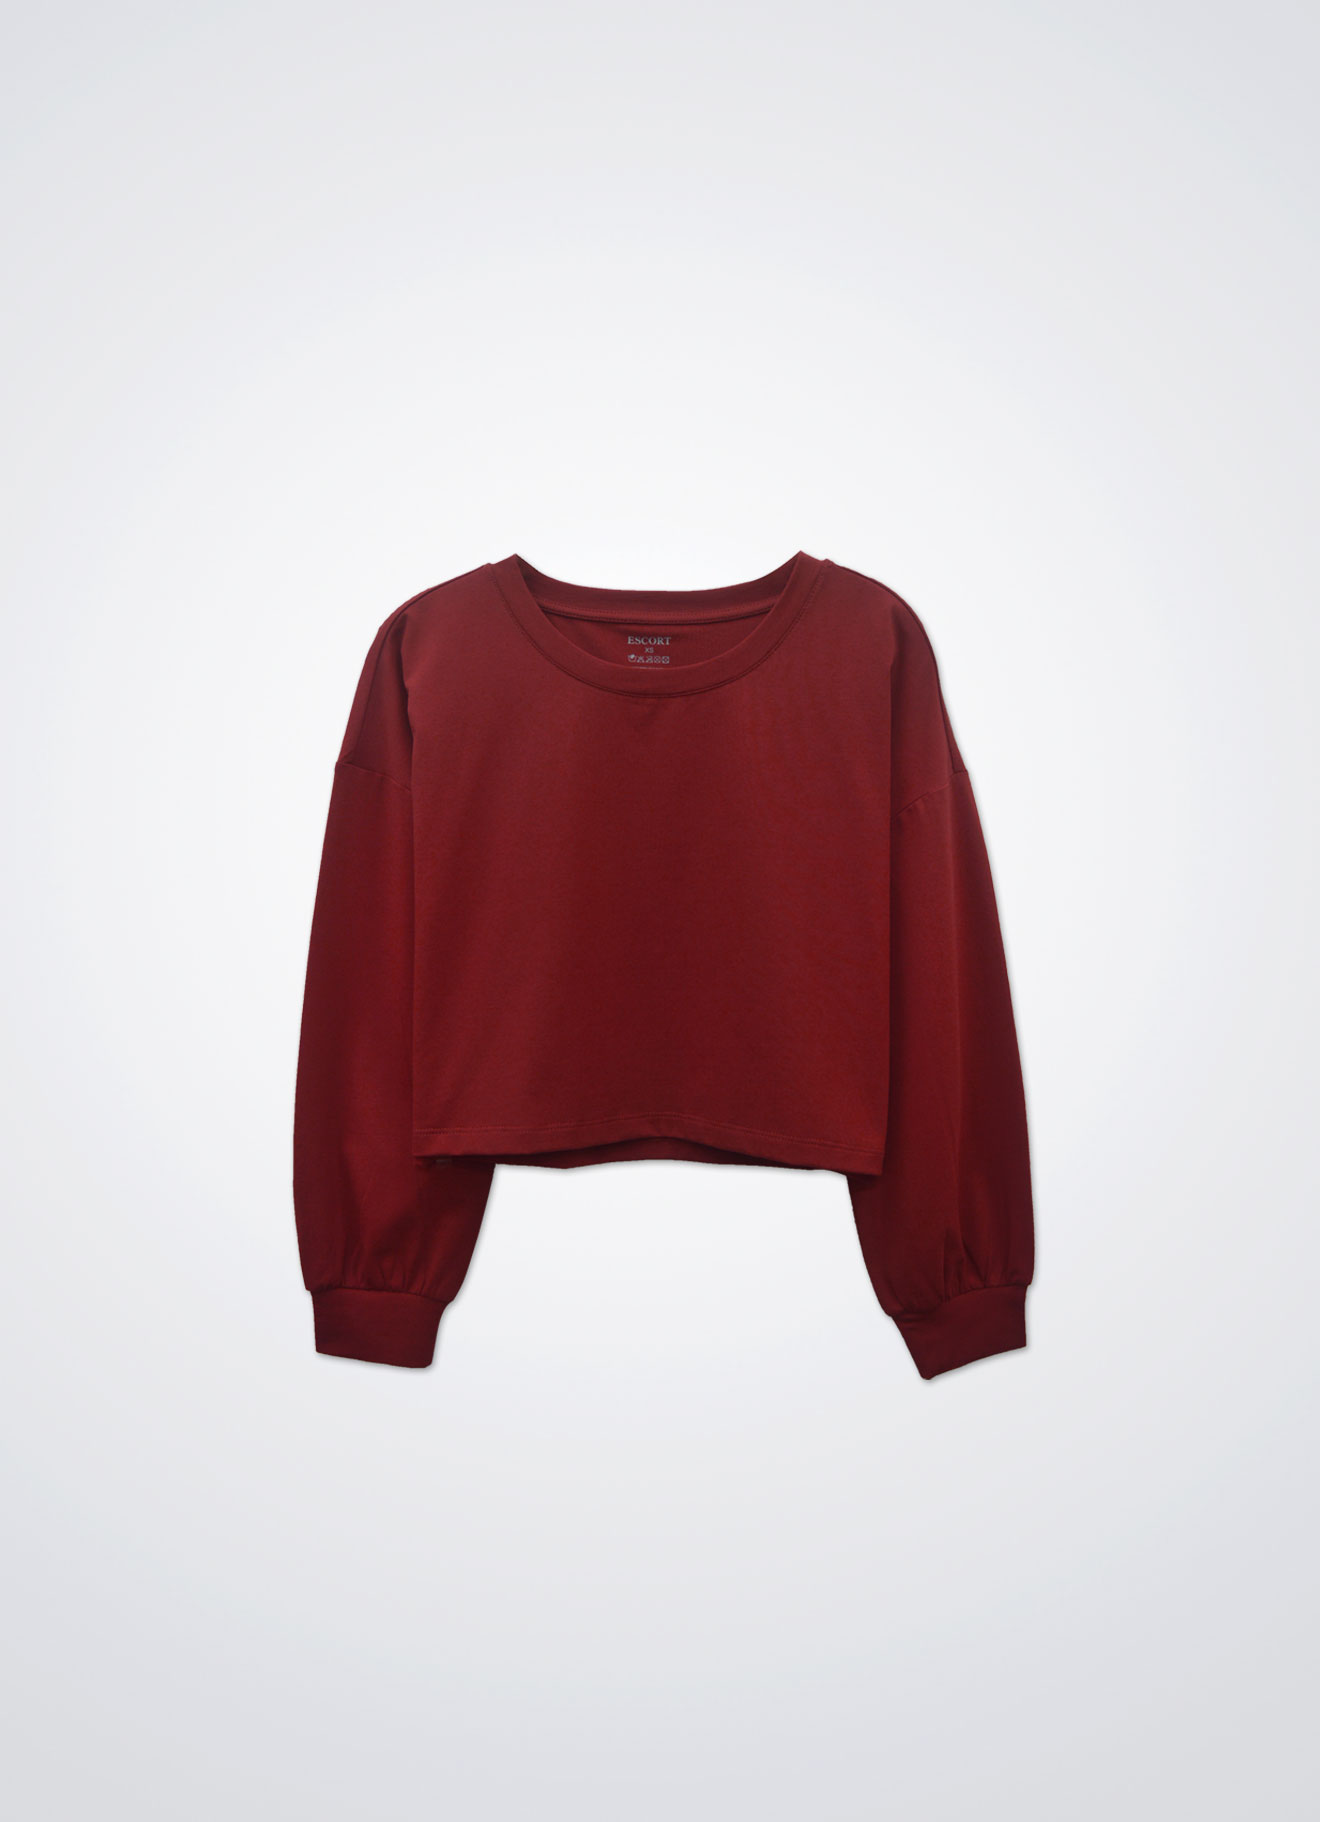 Pompeian-Red by Long Sleeve Top